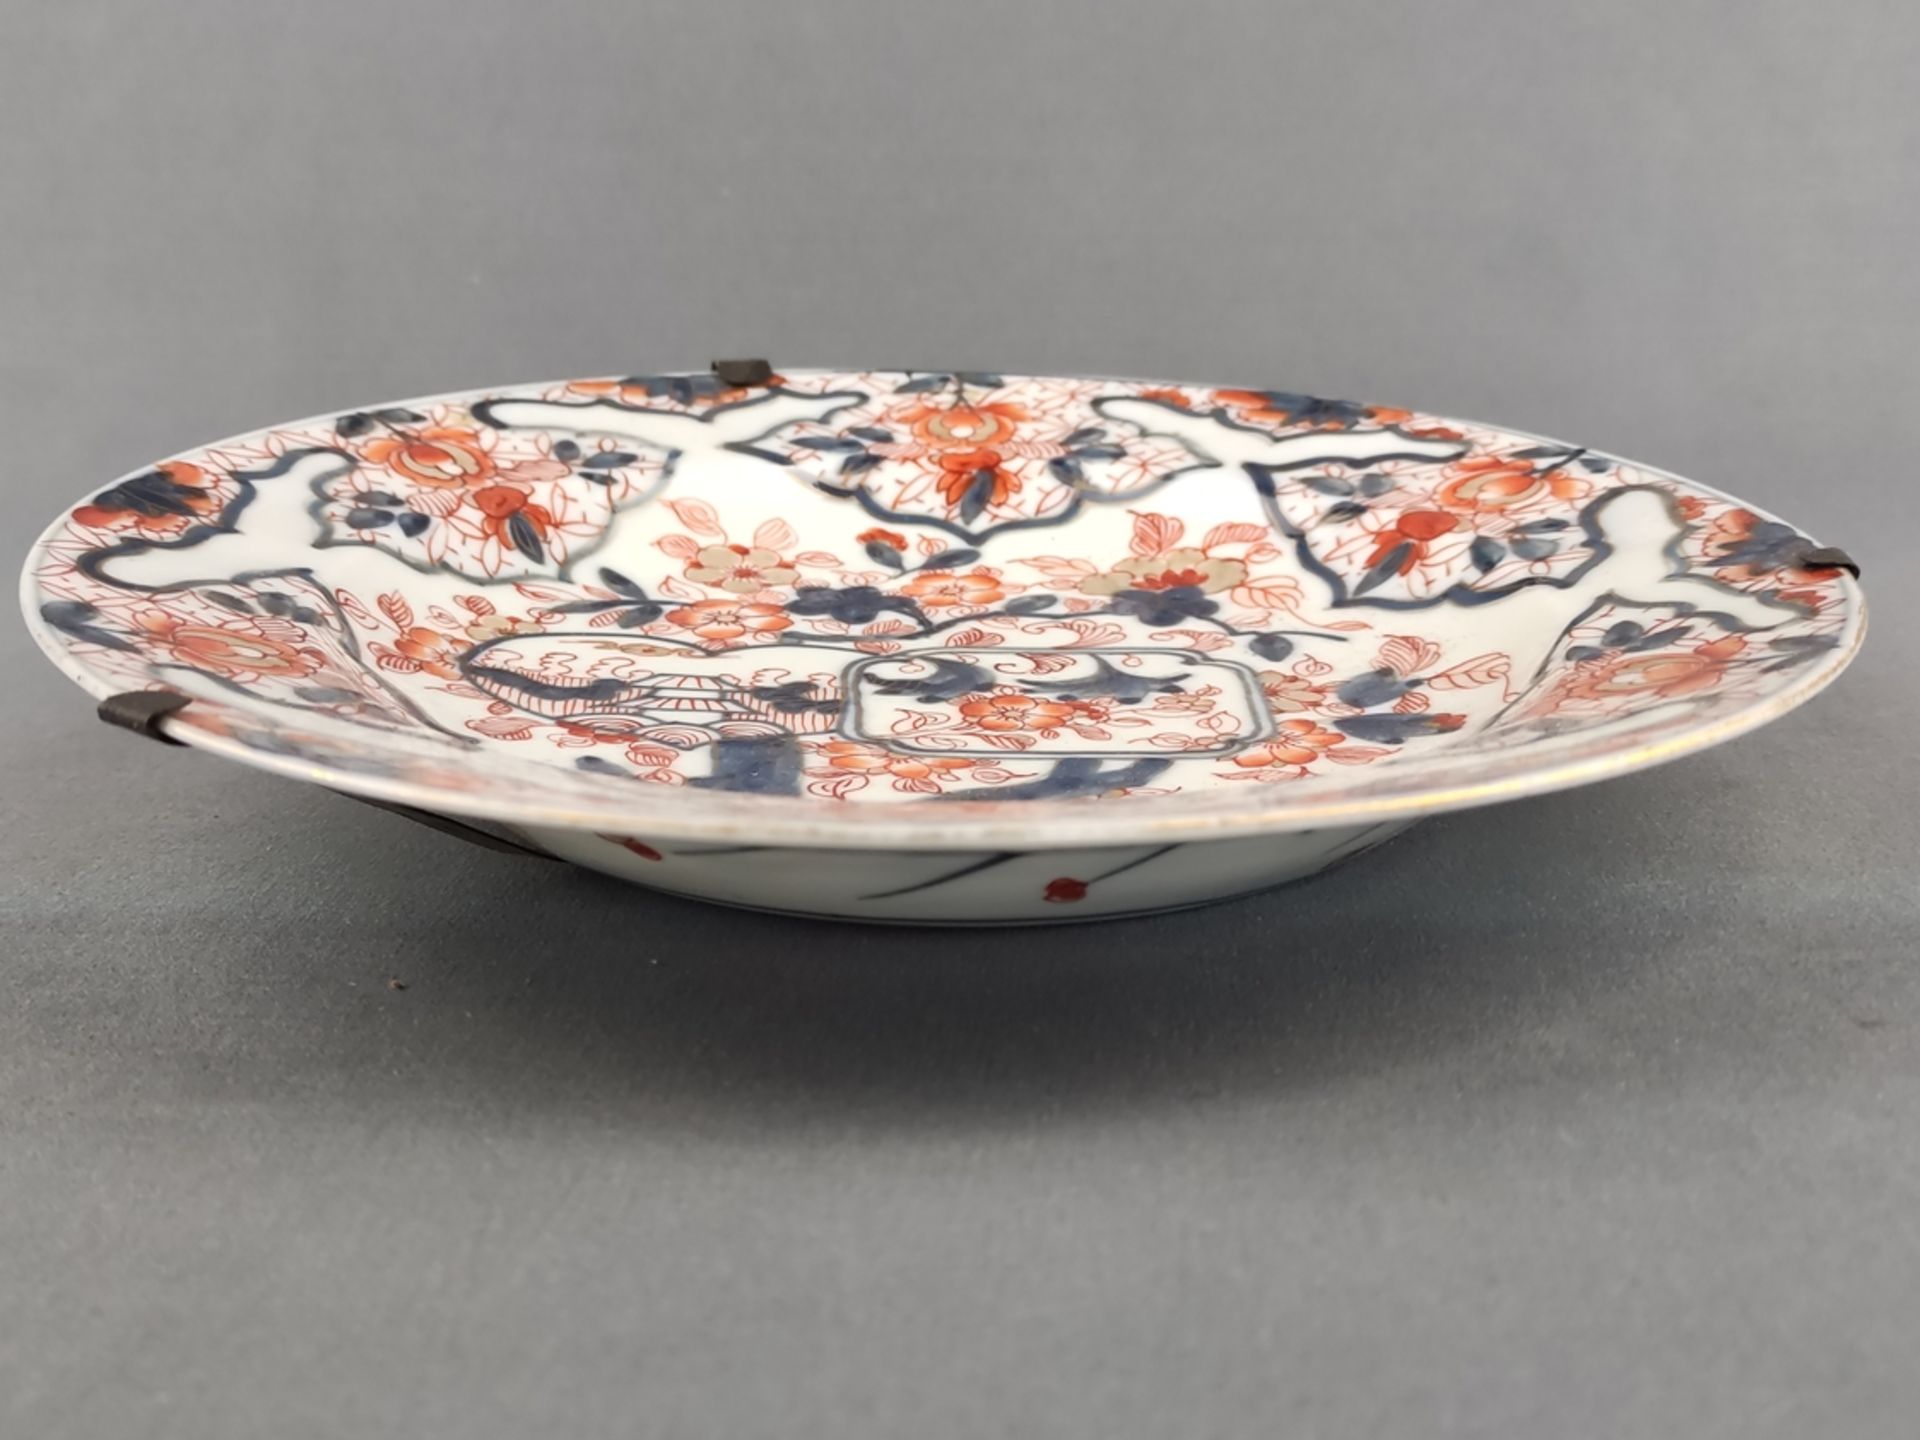 Plate, Japan, Imari decor, with iron-red glaze and gold paint, diameter 23.5cm - Image 3 of 3